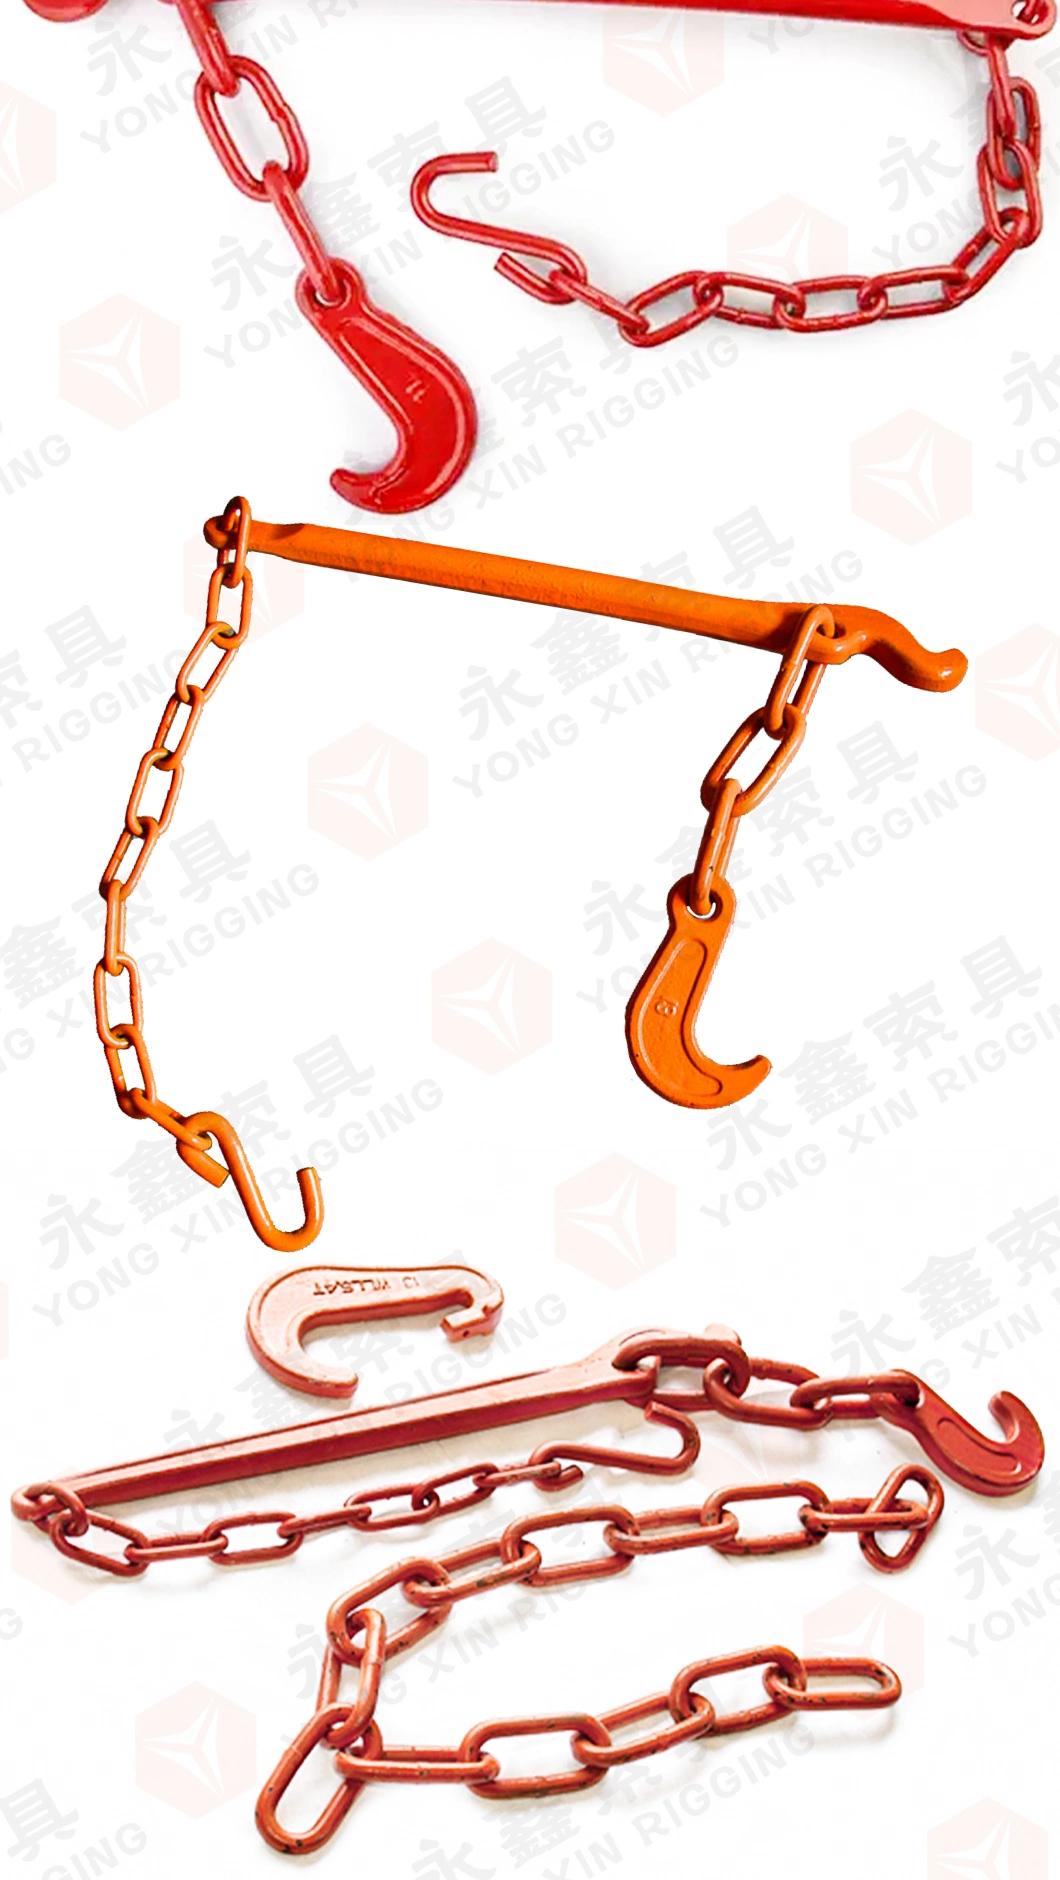 Drop Forged Lashing Lever/Tension Lever Type Load Binder with Hook